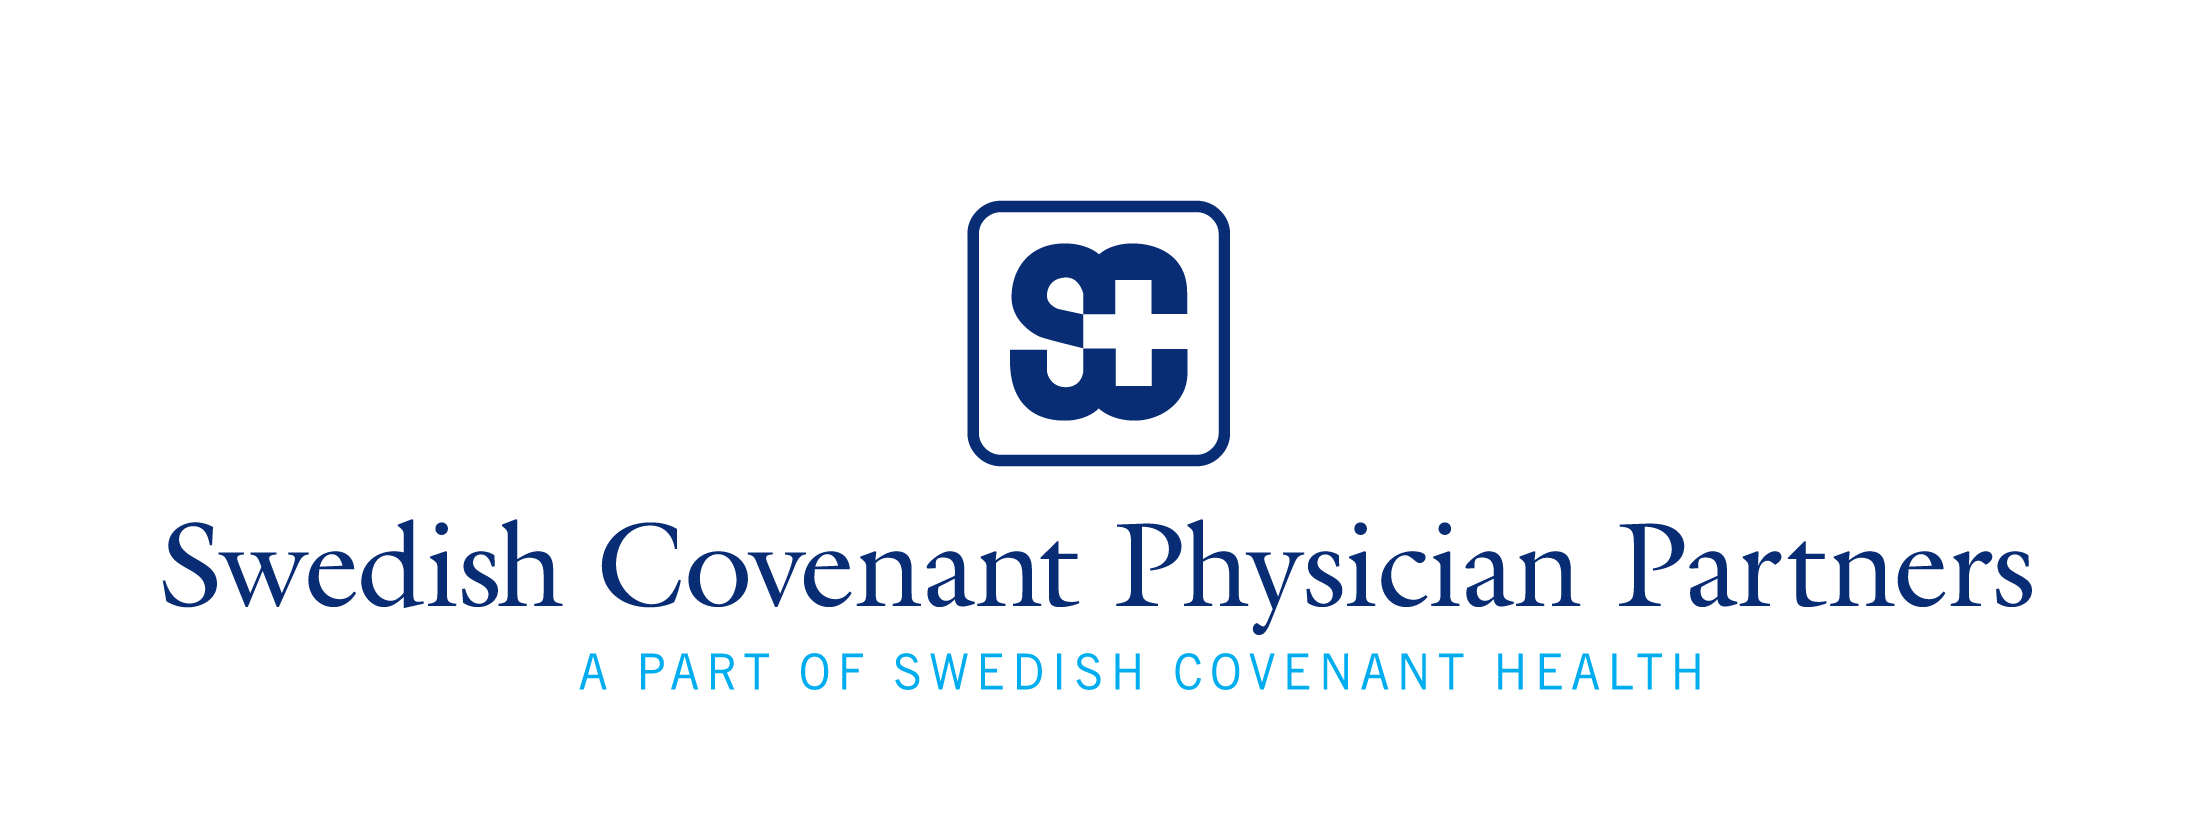 SCH Logo - Logos, Photos and Brand Guidelines | Swedish Covenant Hospital